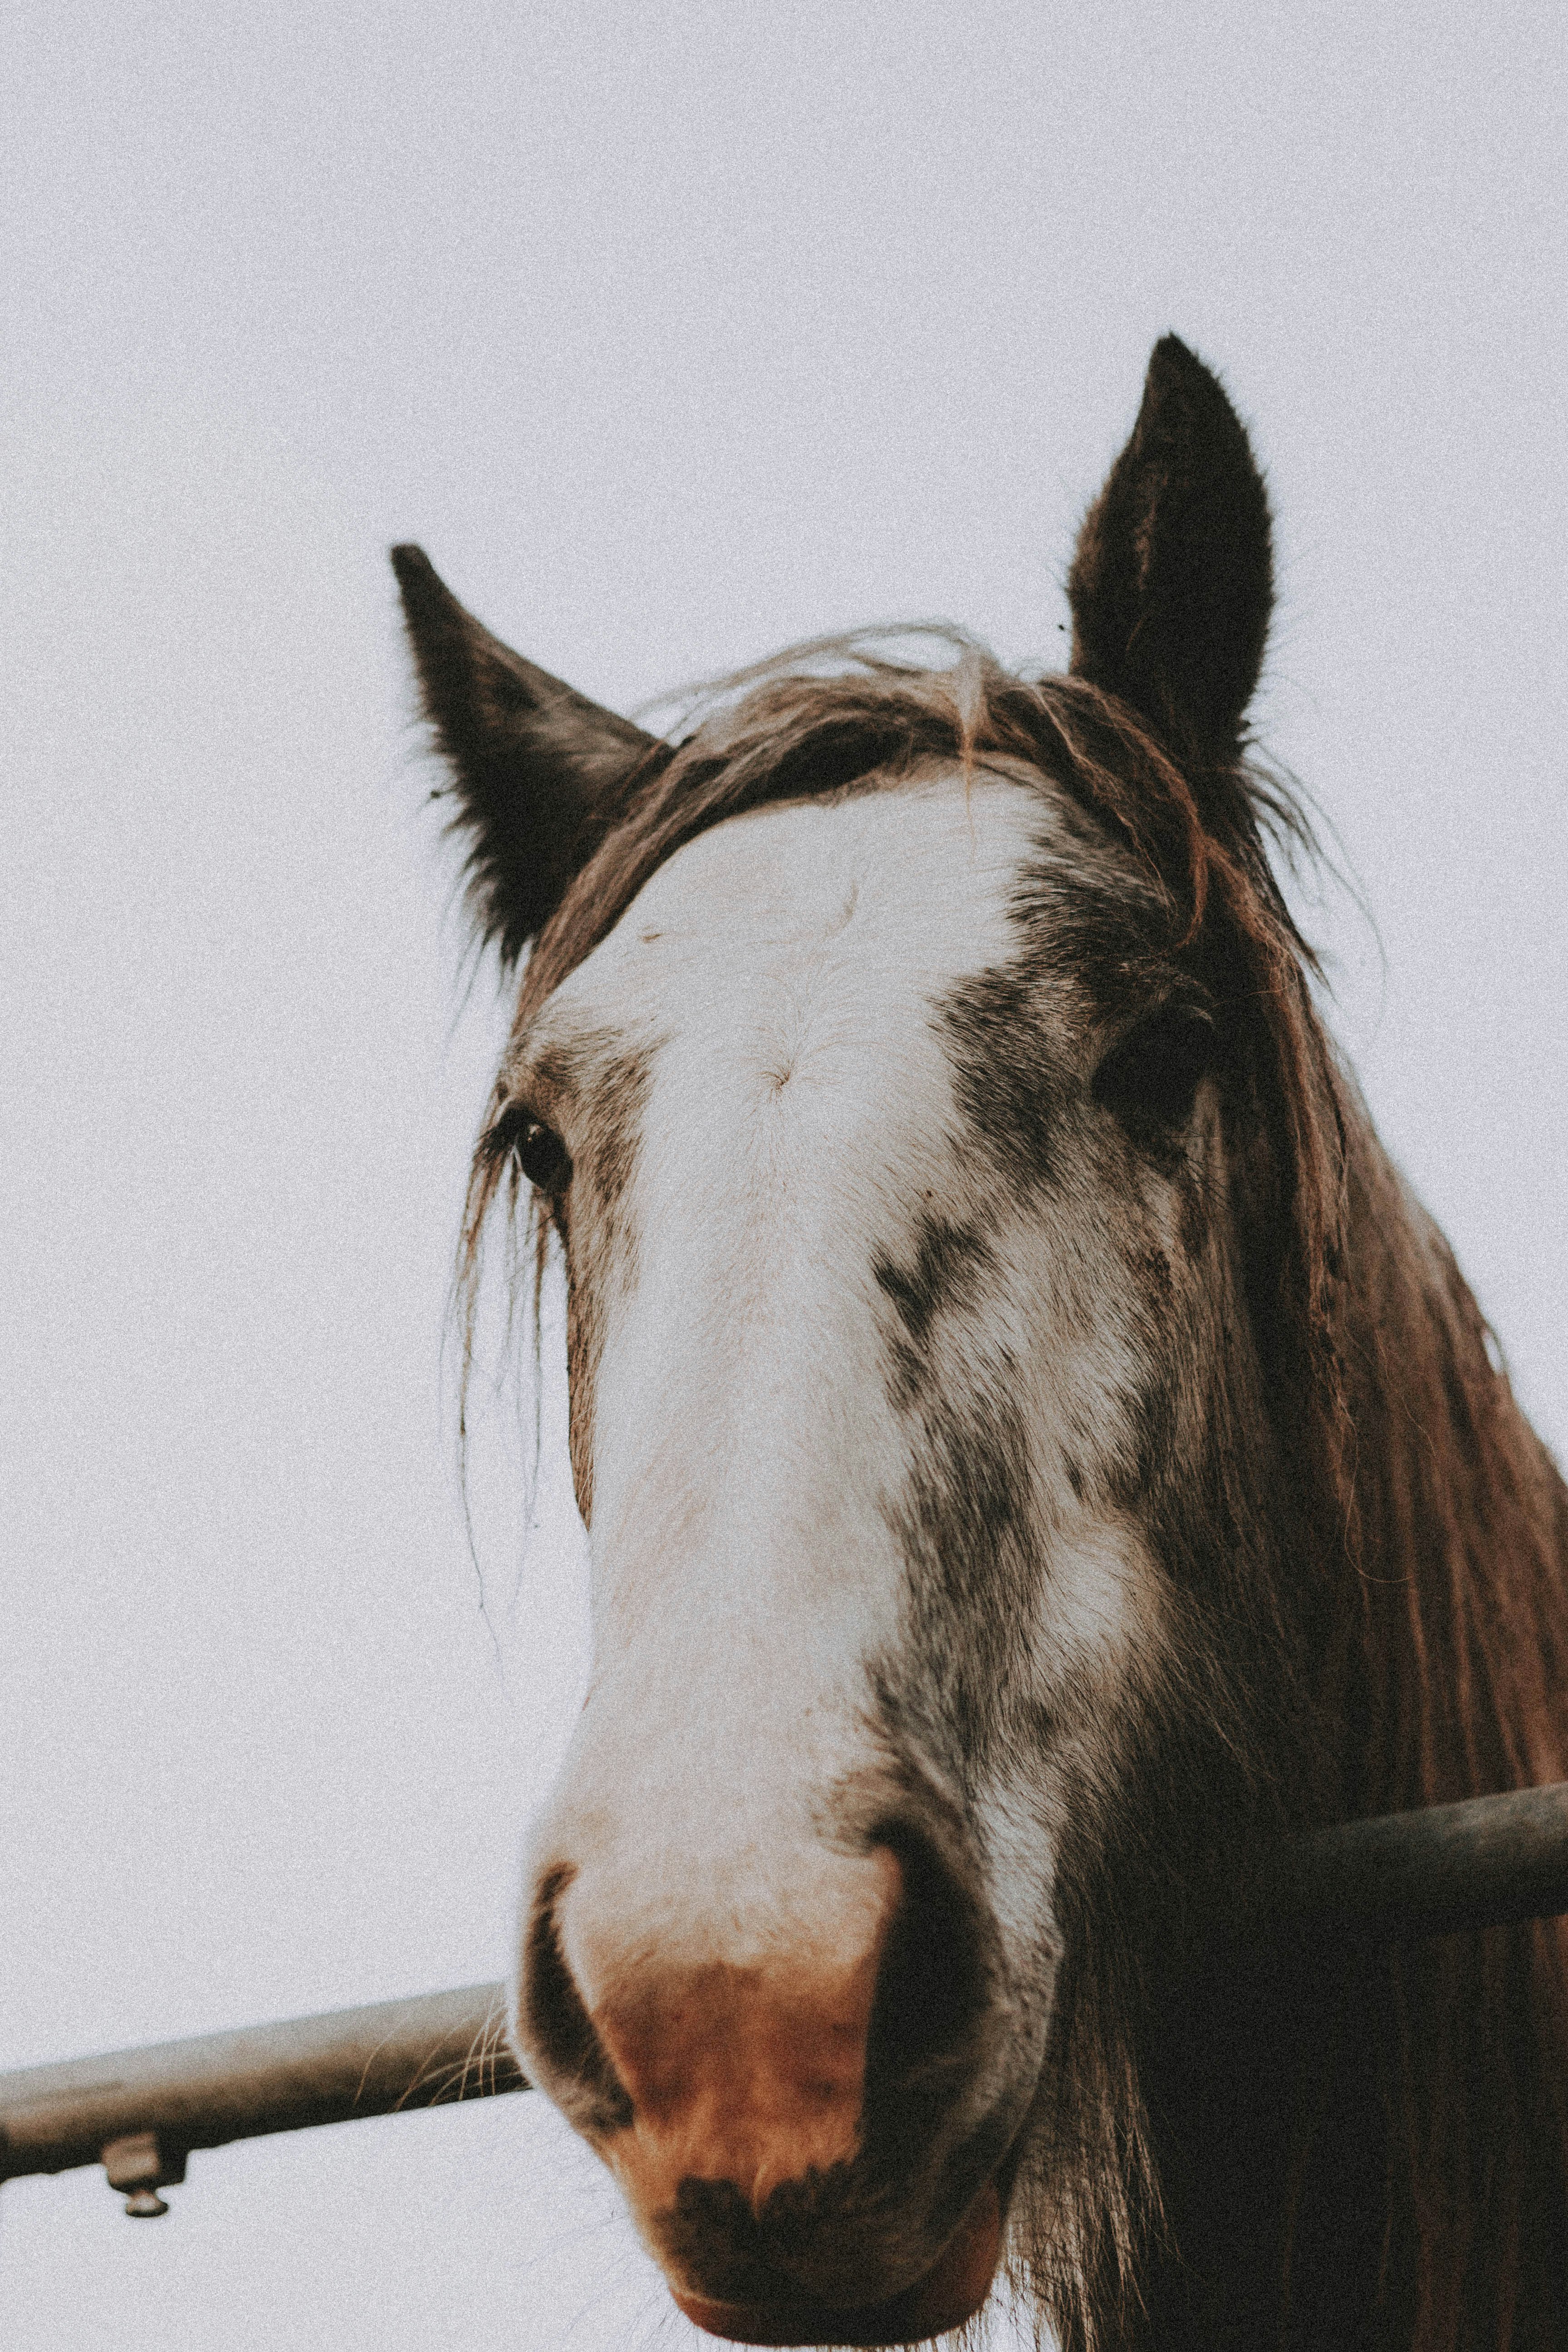 white and brown horse in close up photography